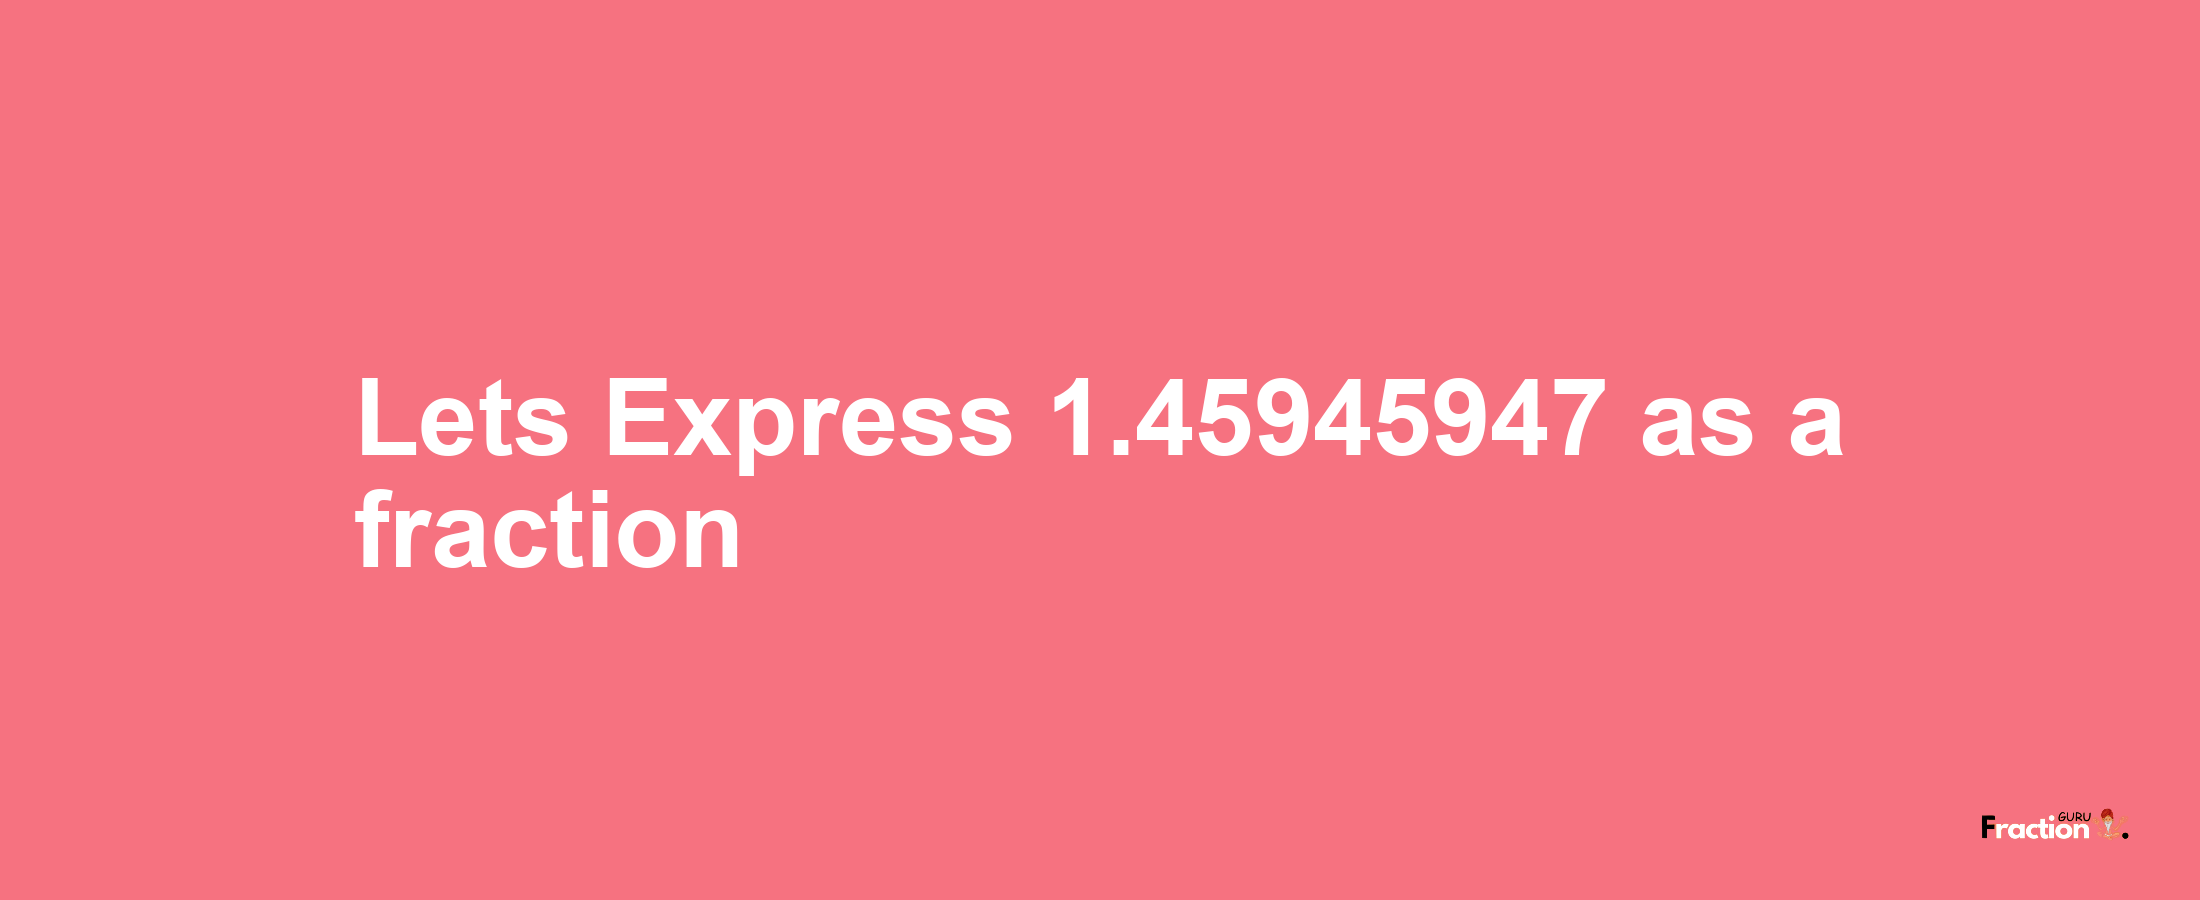 Lets Express 1.45945947 as afraction